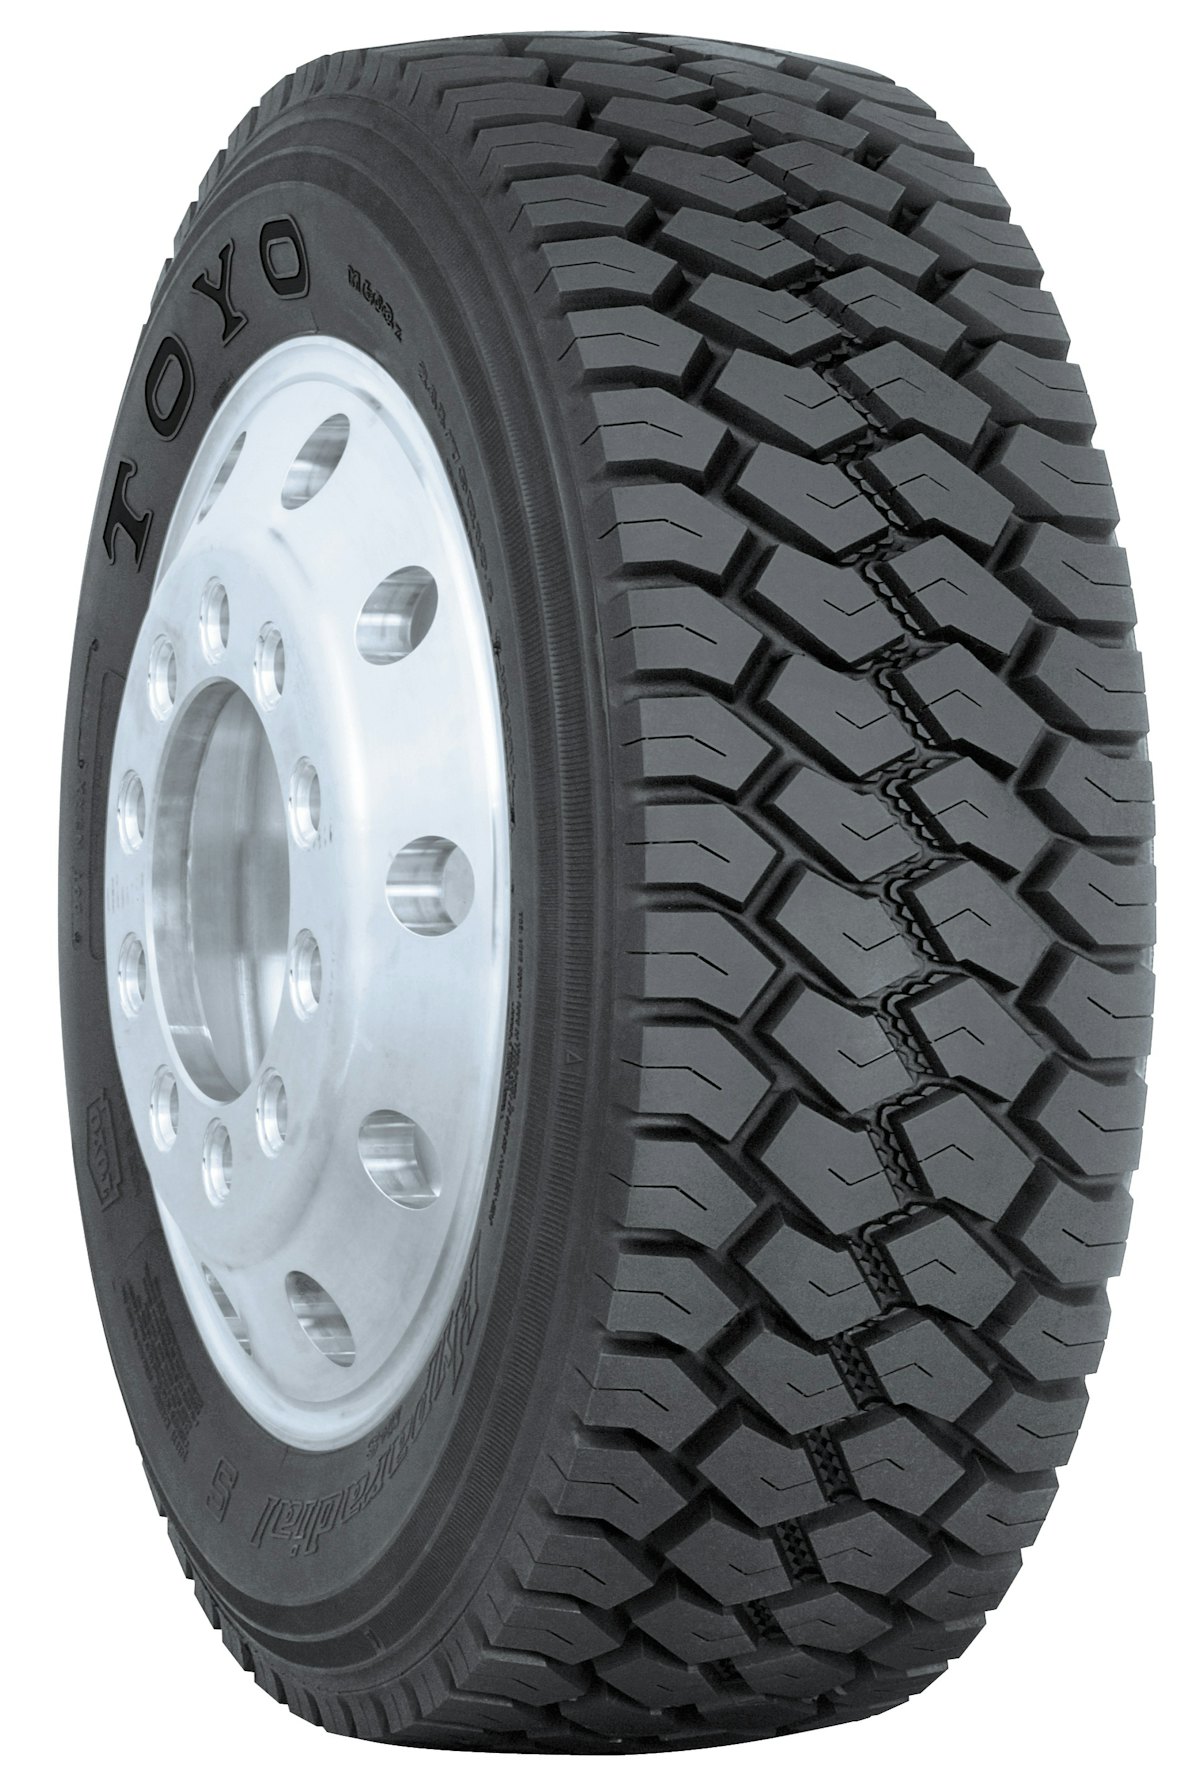 Toyo Tires improves commercial tire lineup Trucks, Parts, Service